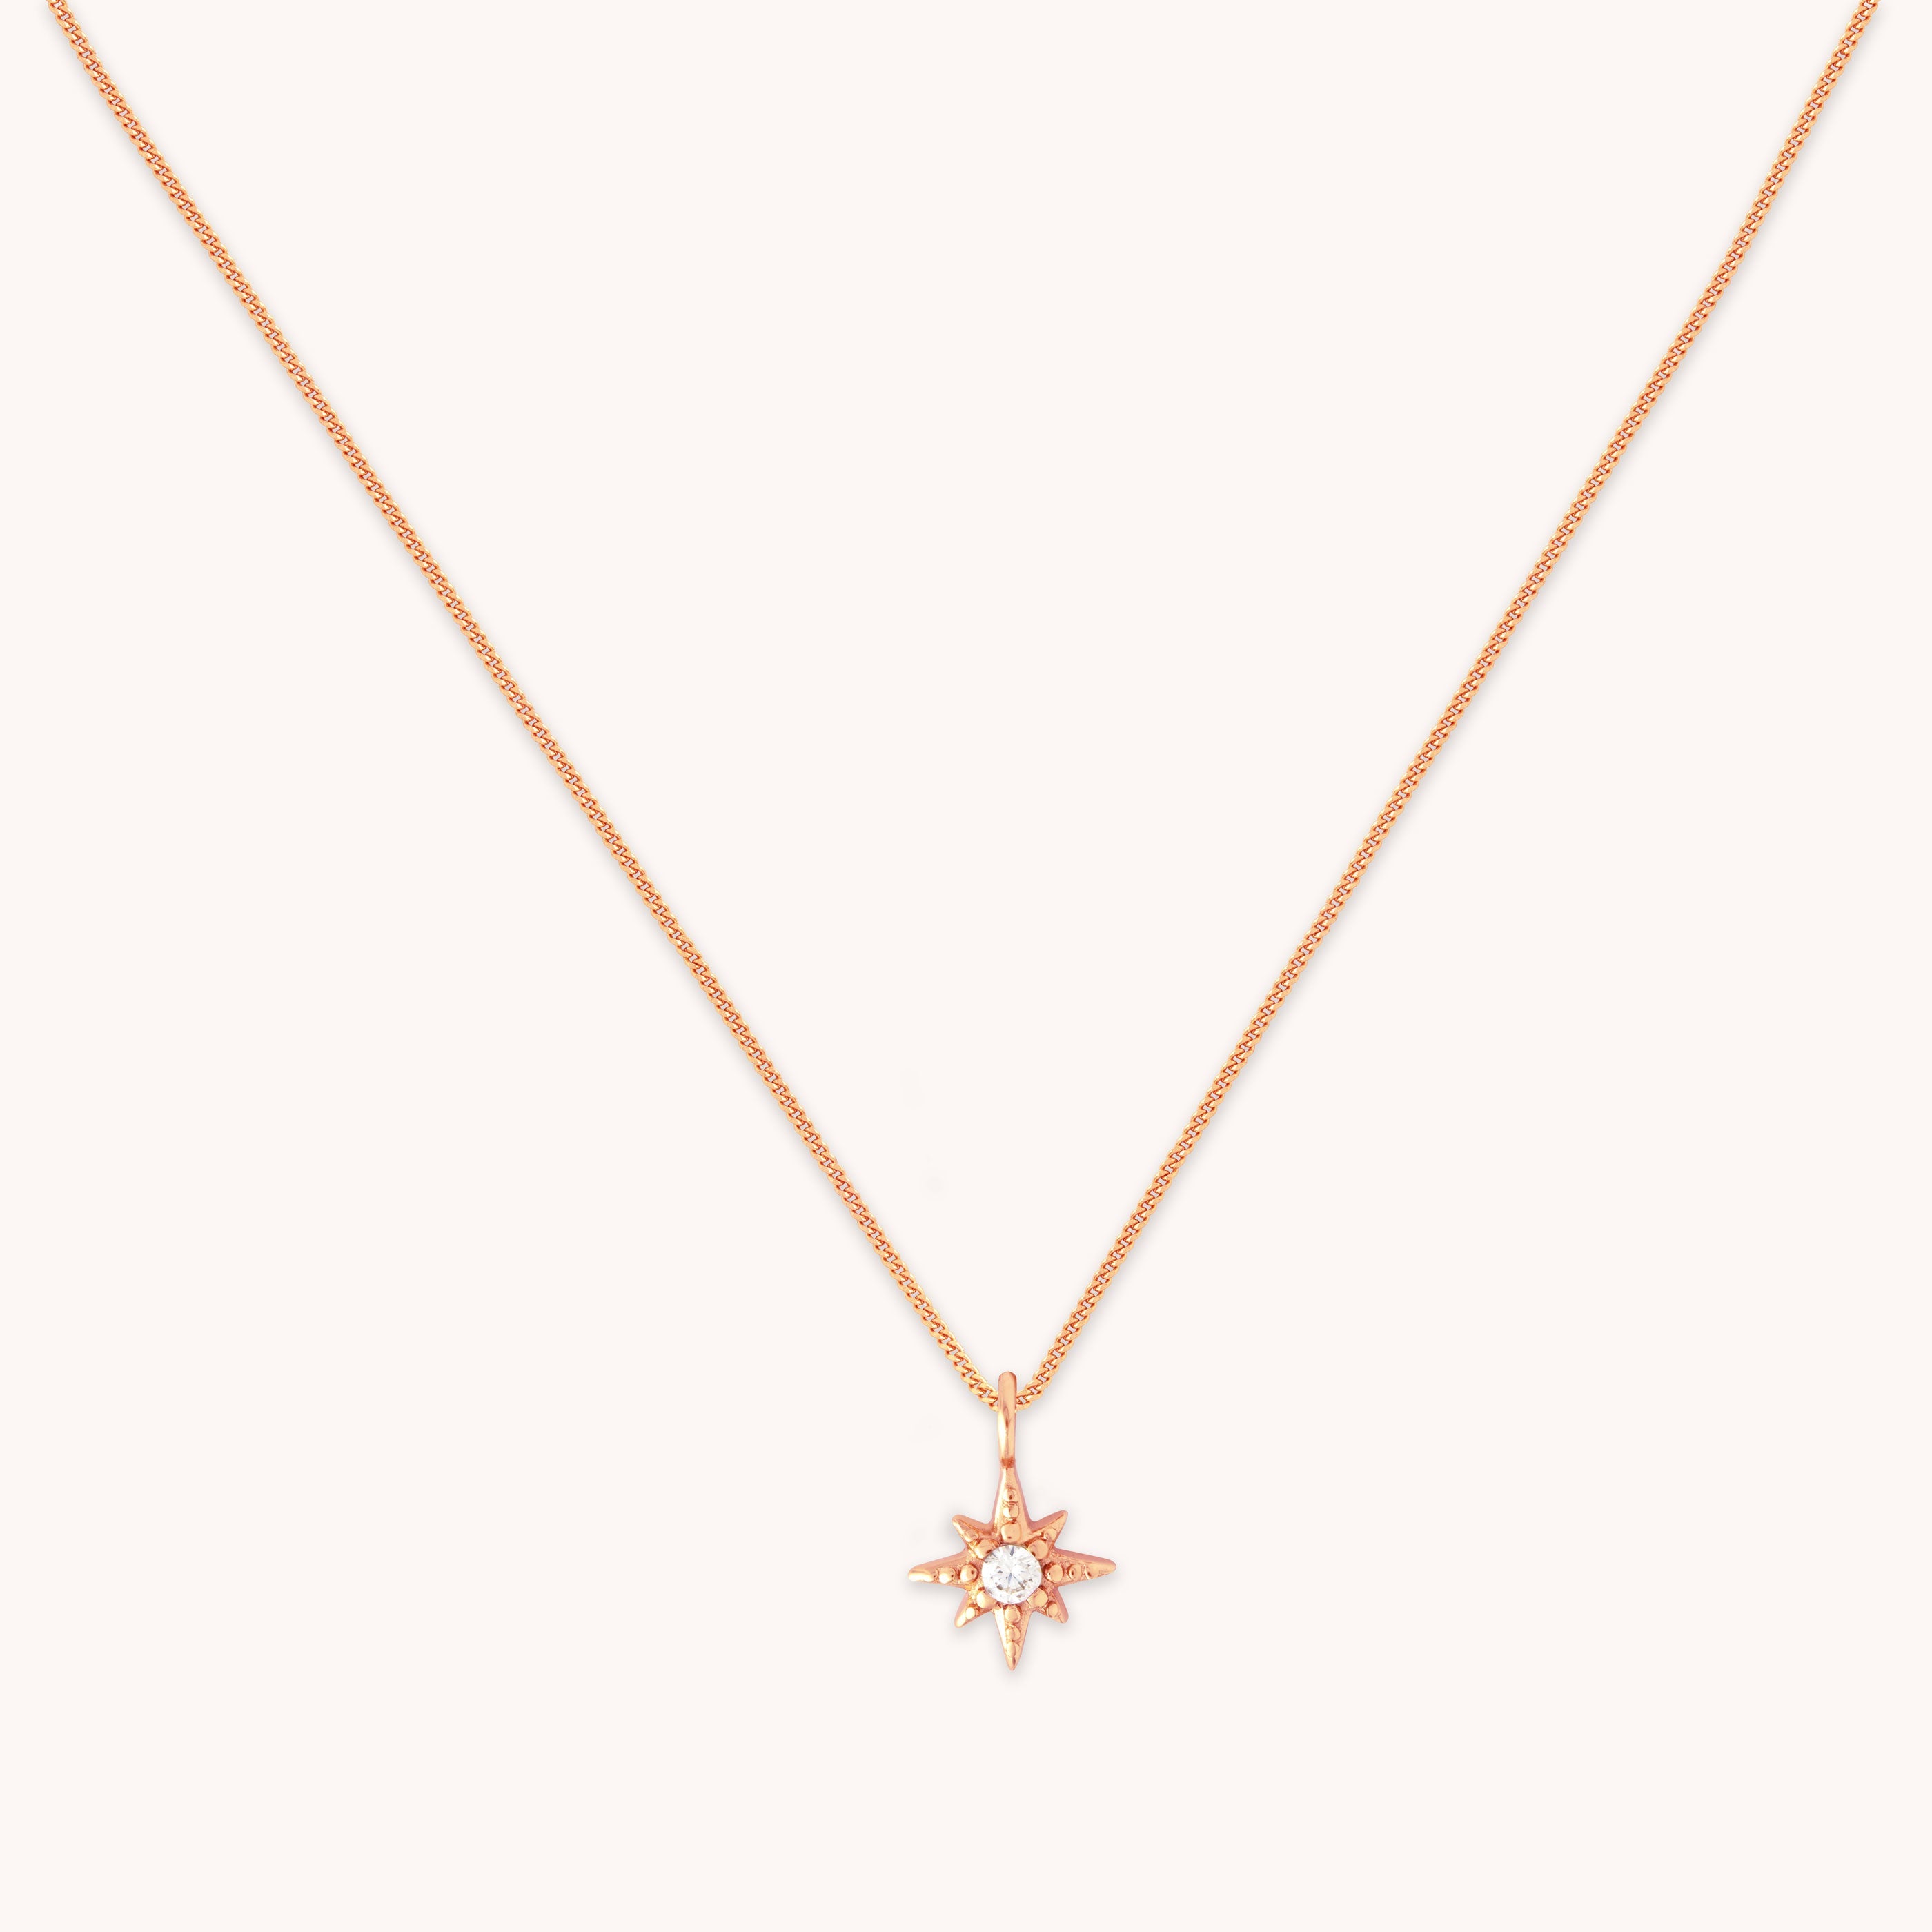 Twilight Star Pendant Necklace in Rose Gold